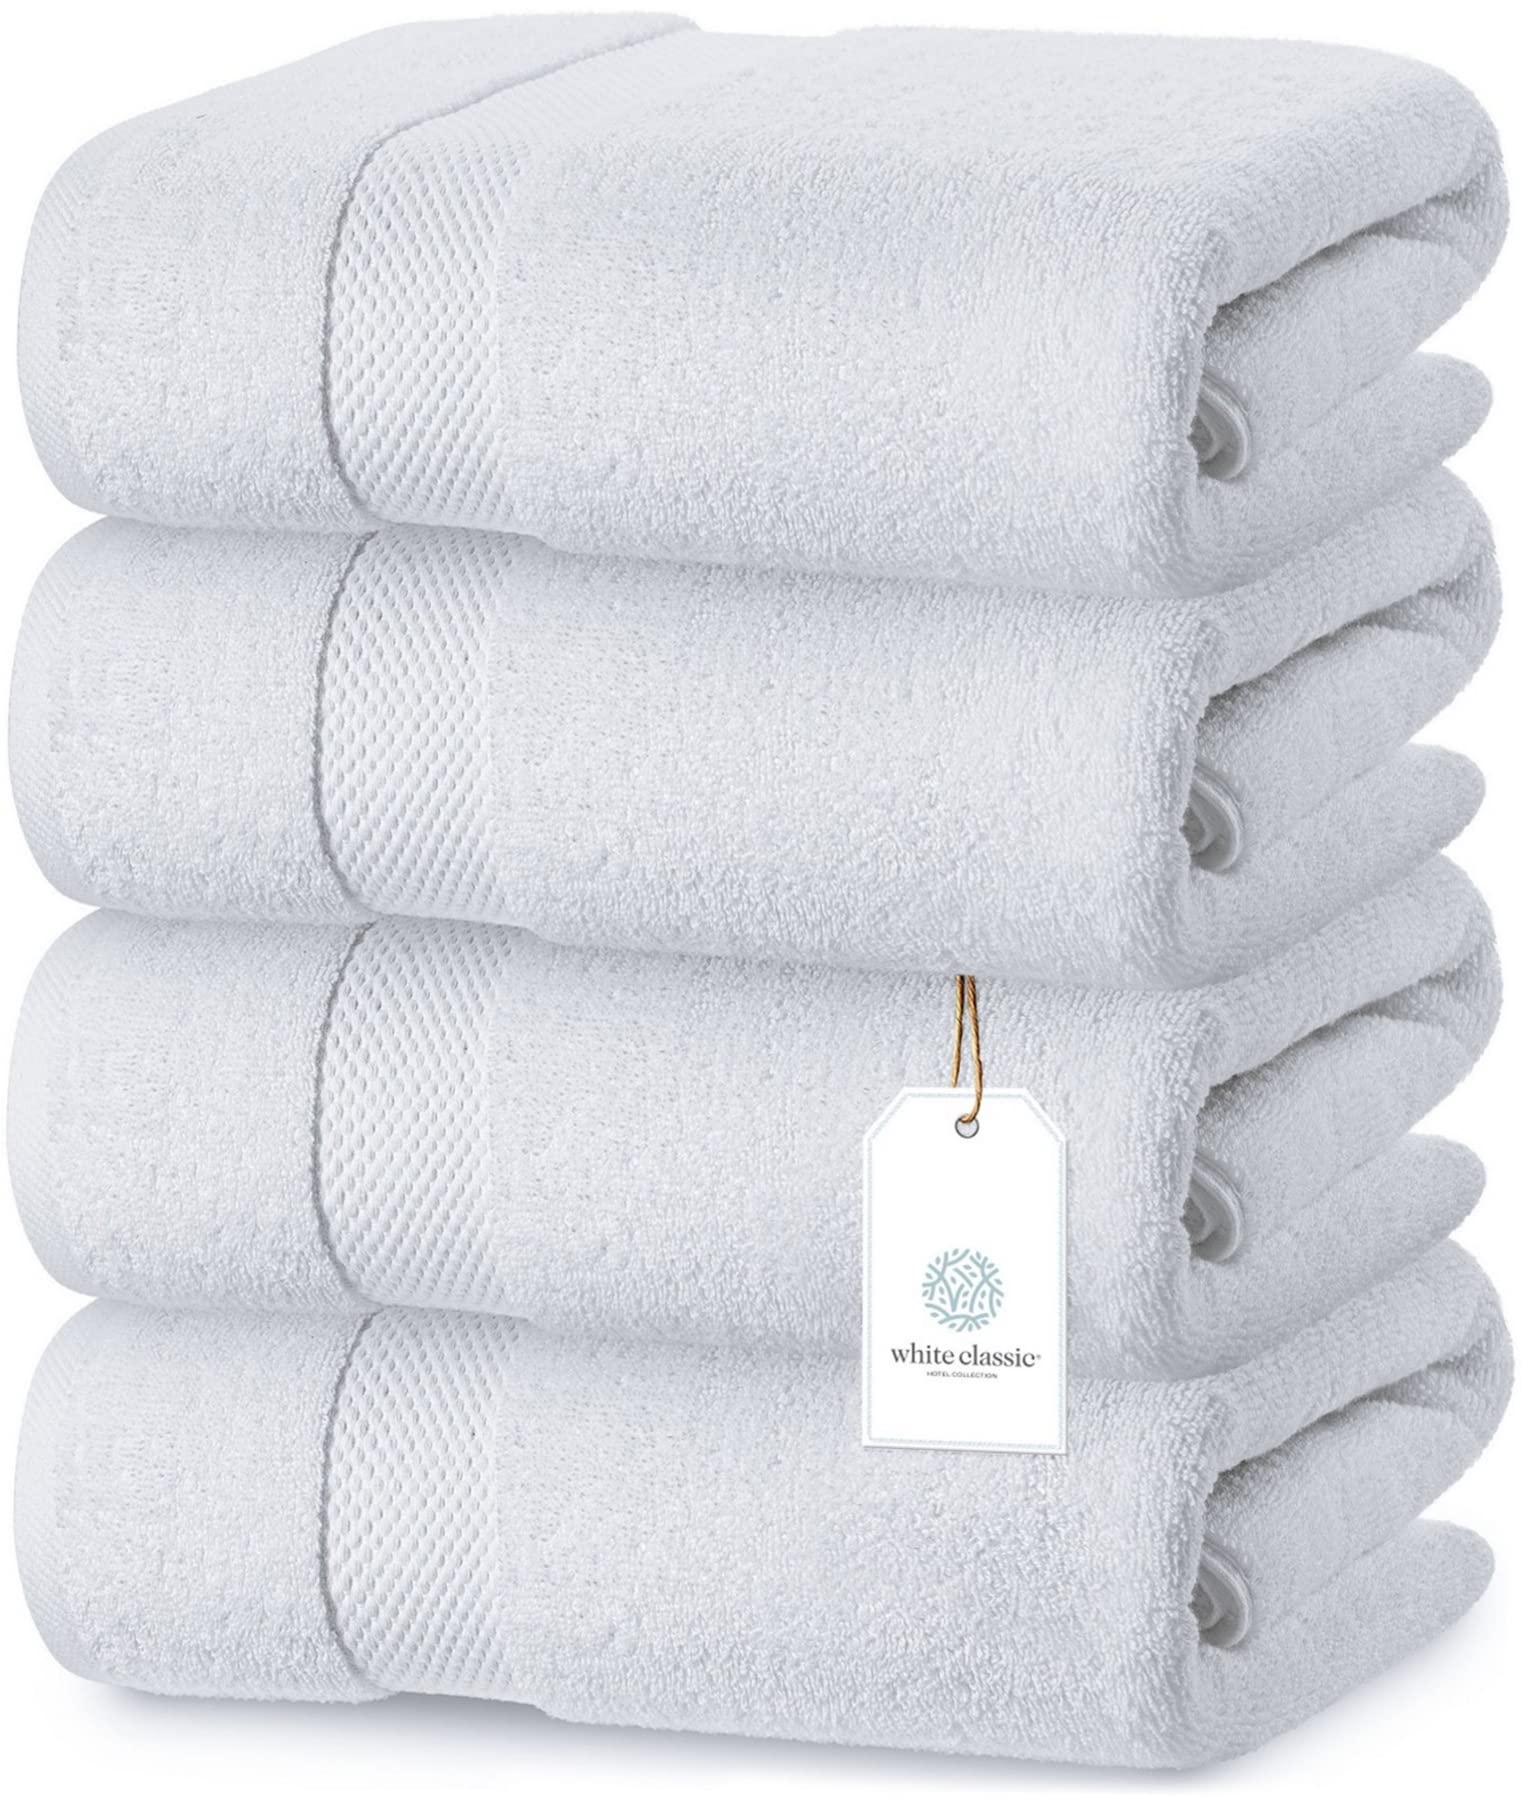 Luxury White Bath Towels Extra Large | 100% Soft Cotton 700 GSM Thick 2Ply Absorbent Quick Dry Hotel Bathroom Towel | 27x54 Inch | White | Set of 4  - Acceptable